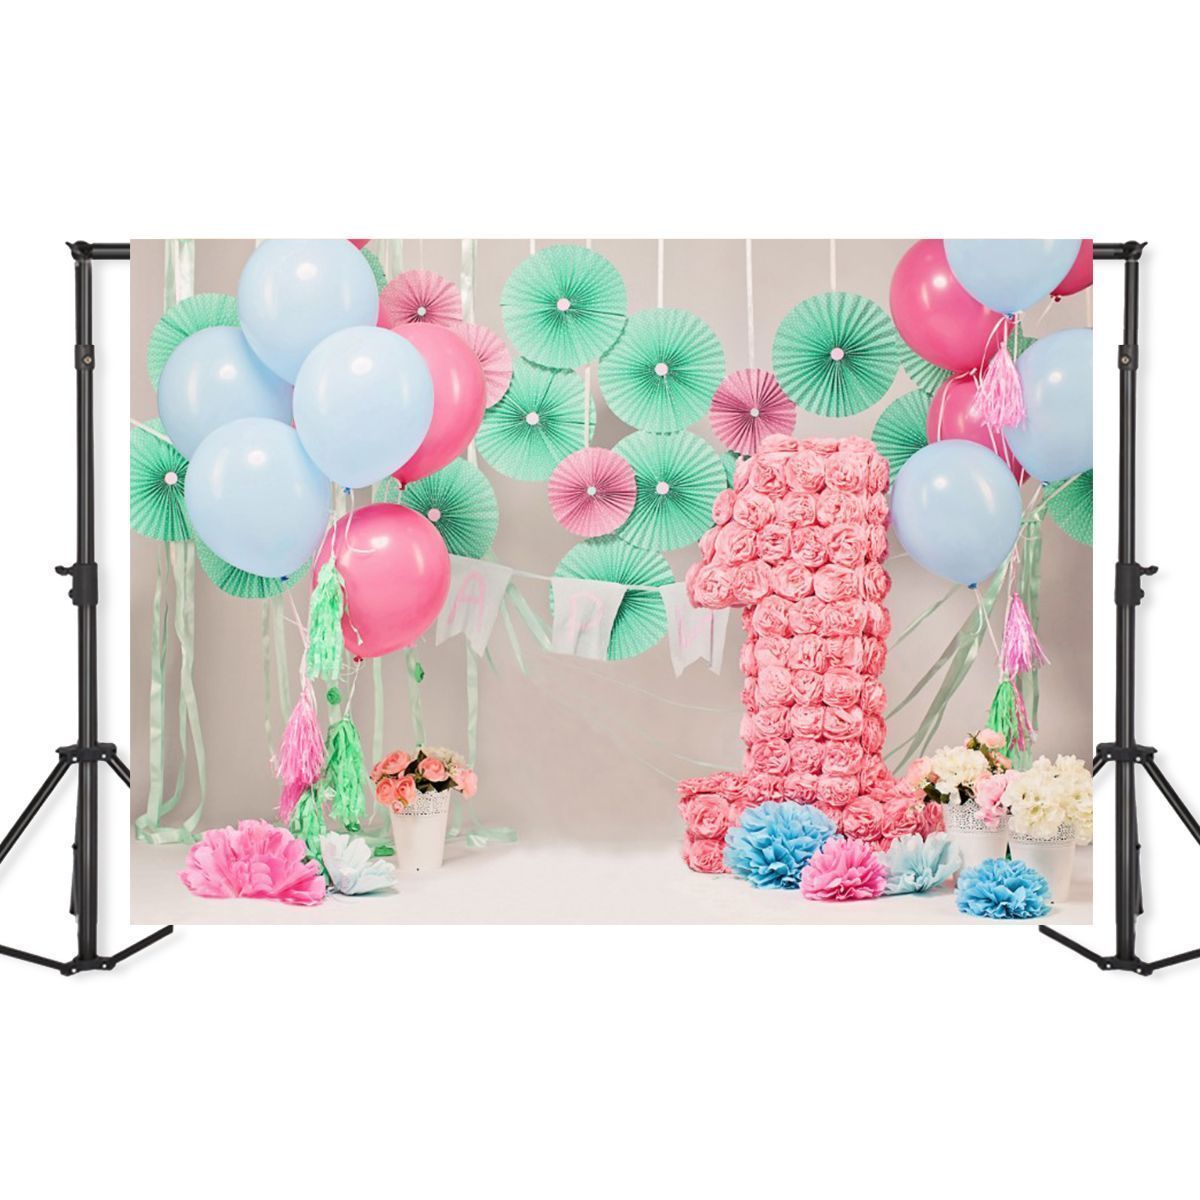 5x7FT-Vinyl-Balloon-One-Year-Old-Party-Photography-Backdrop-Background-Studio-Prop-1449893